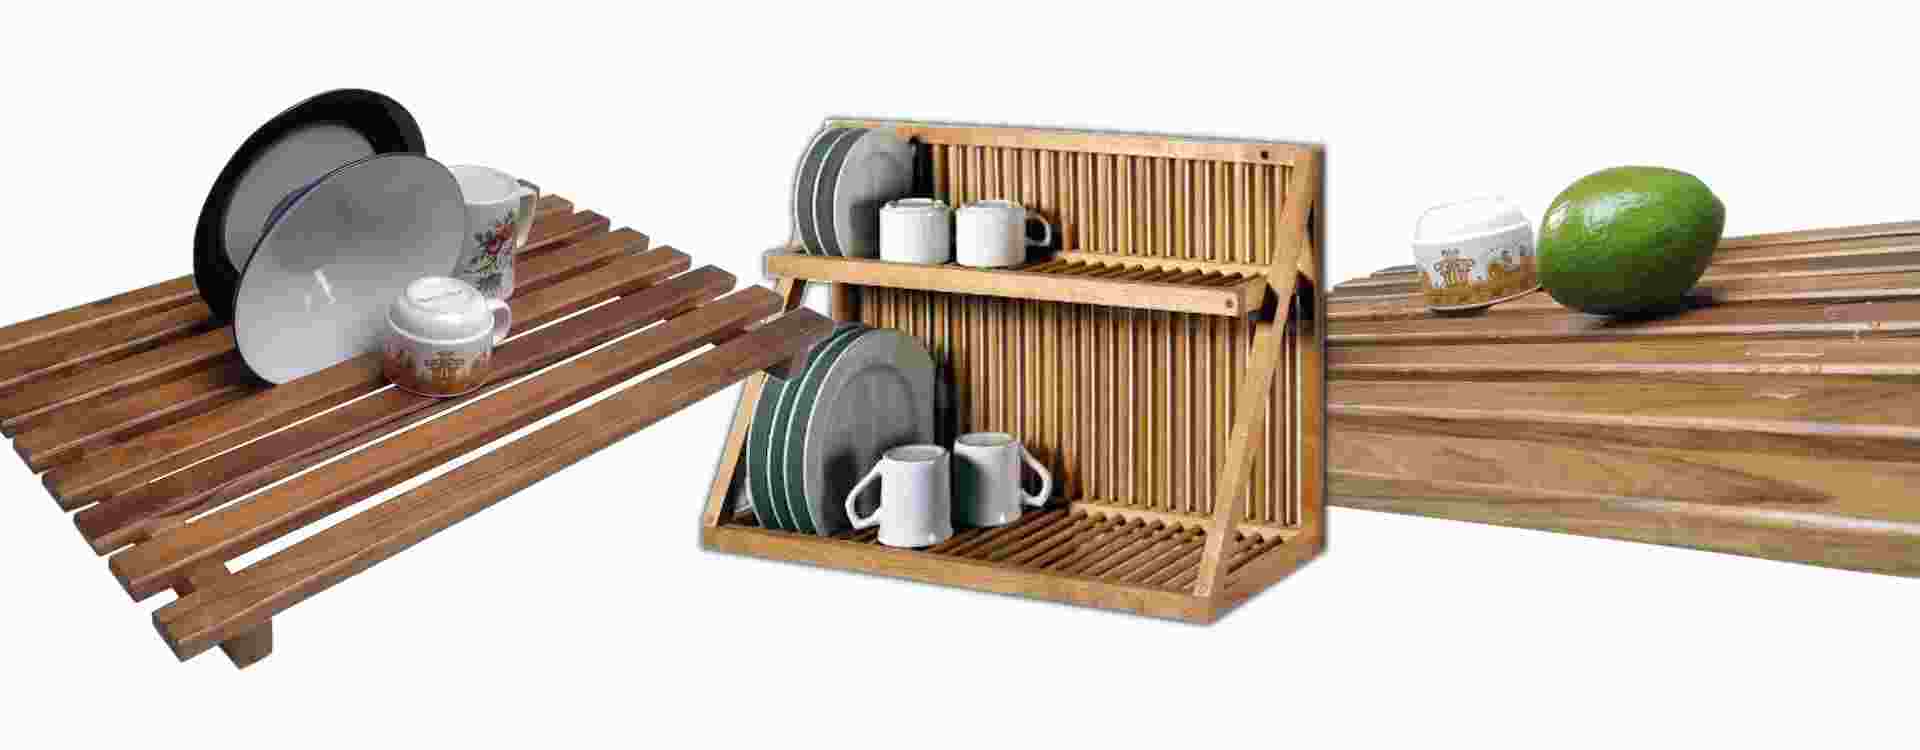 Types of Dish Drying Racks for the Kitchen